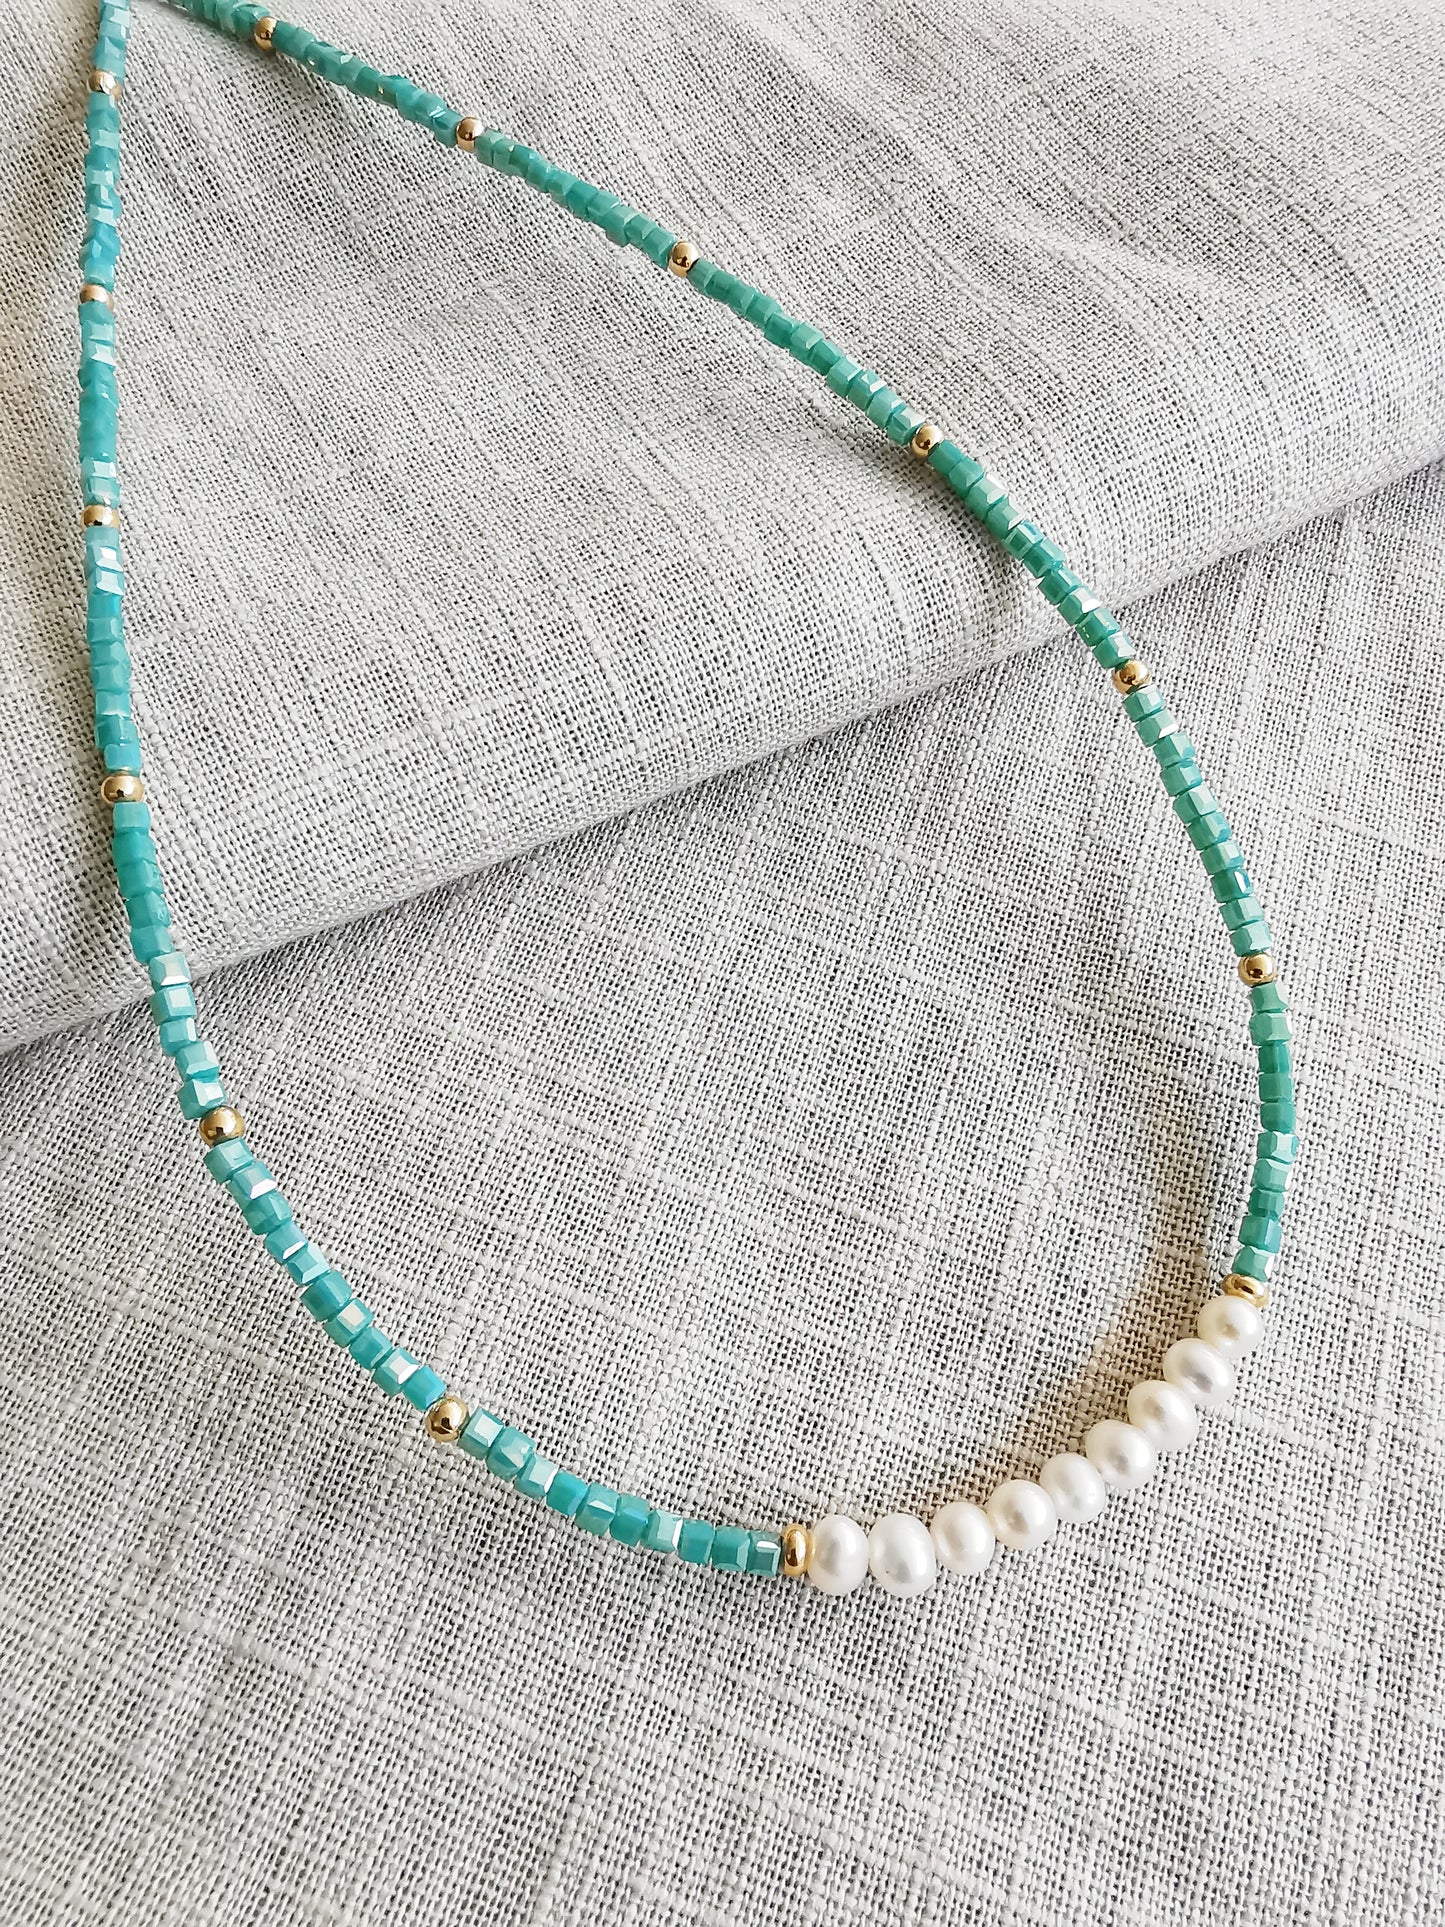 LaLi - Crystal Necklace with Freshwater Pearls.